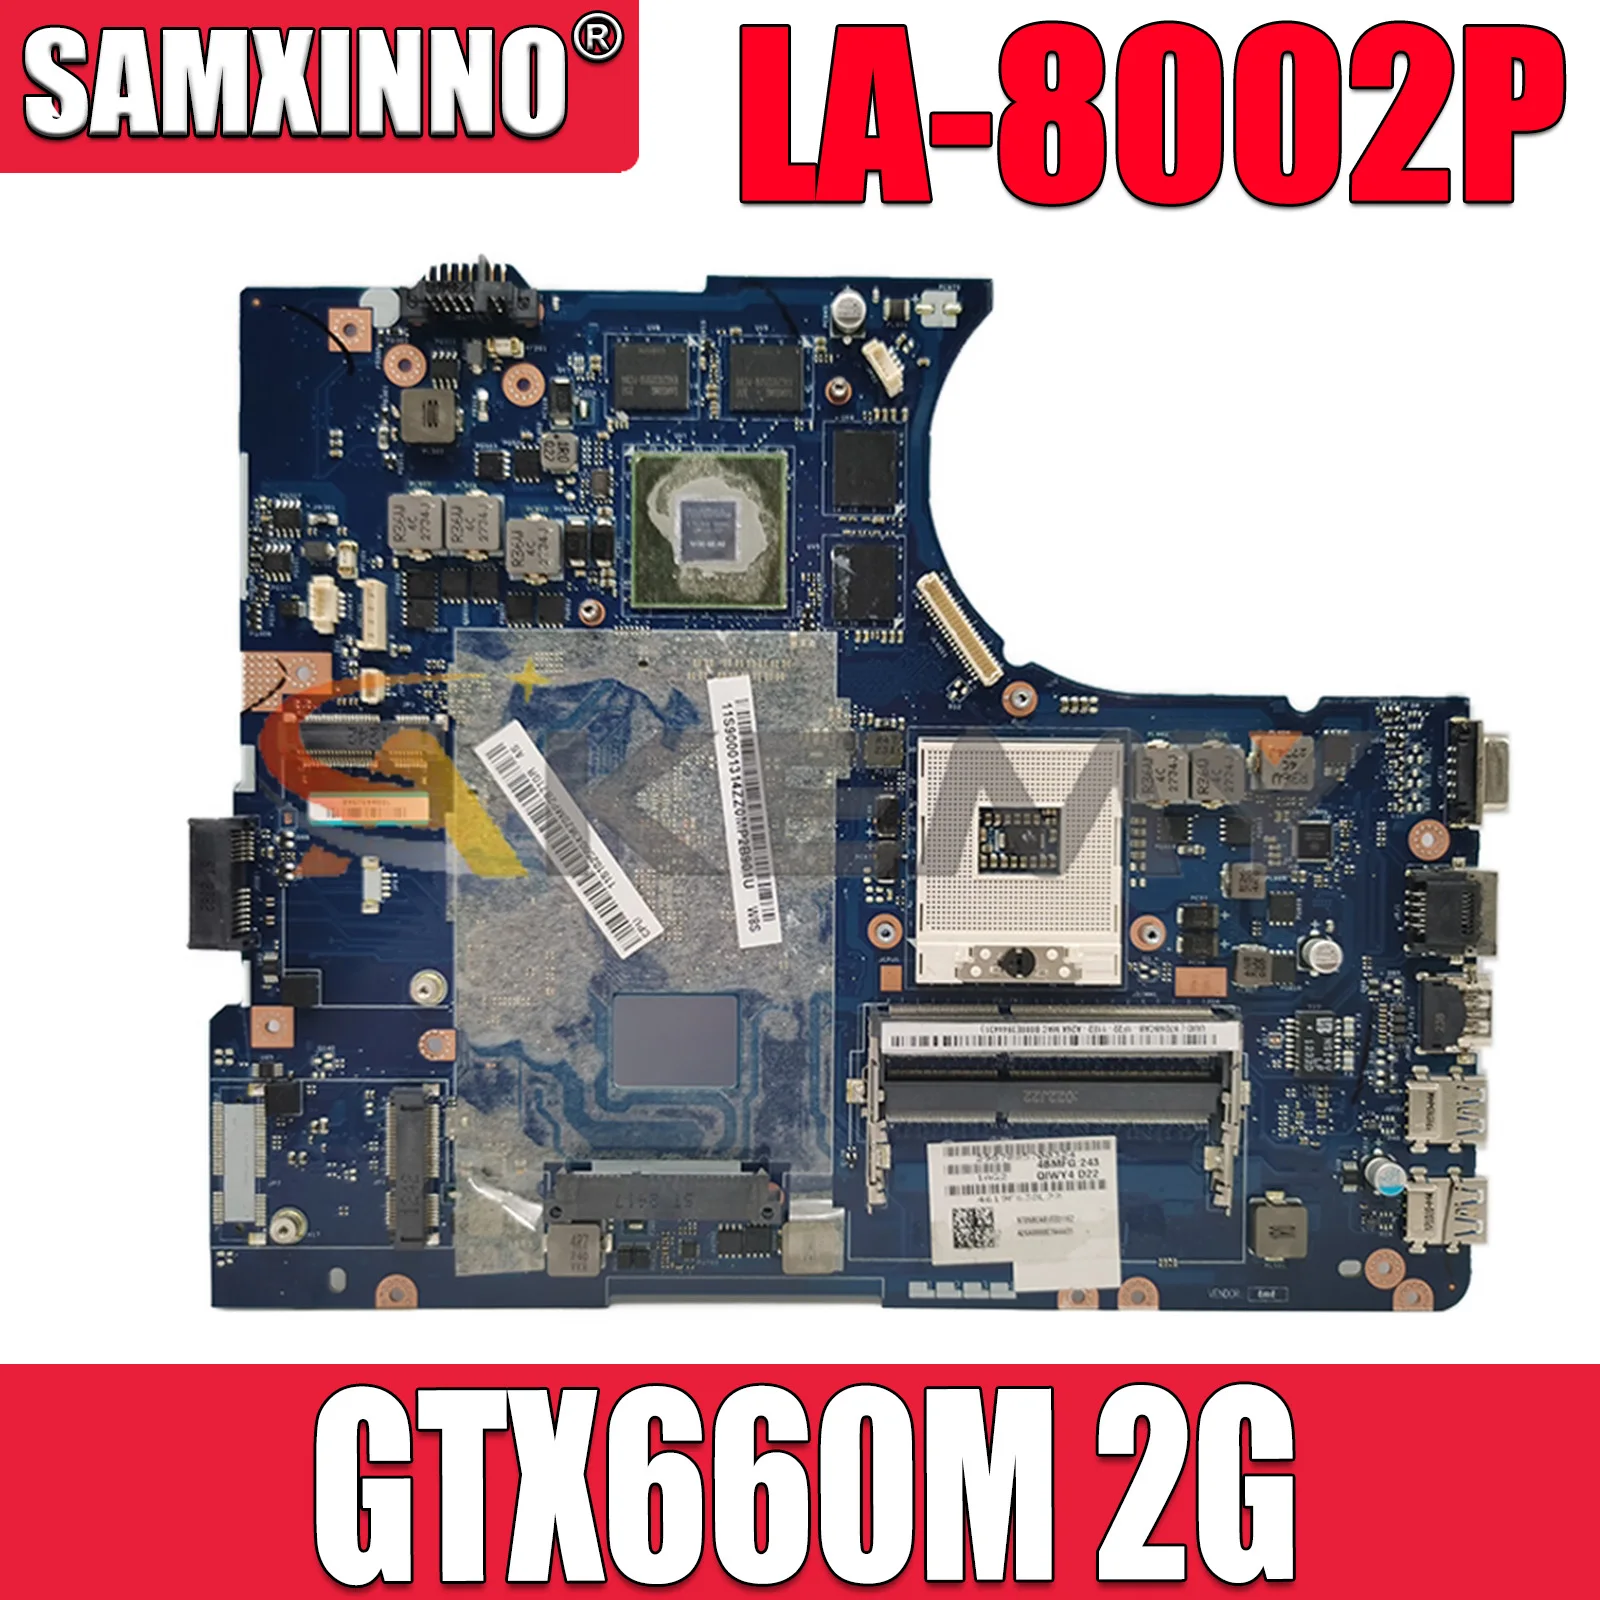 

QIWY4 LA-8002P For Lenovo Y580 Laptop Motherboard Y580 Notebook PC Mainboard GTX660M 2GB HM76 Support i3 i5 i7 cpu